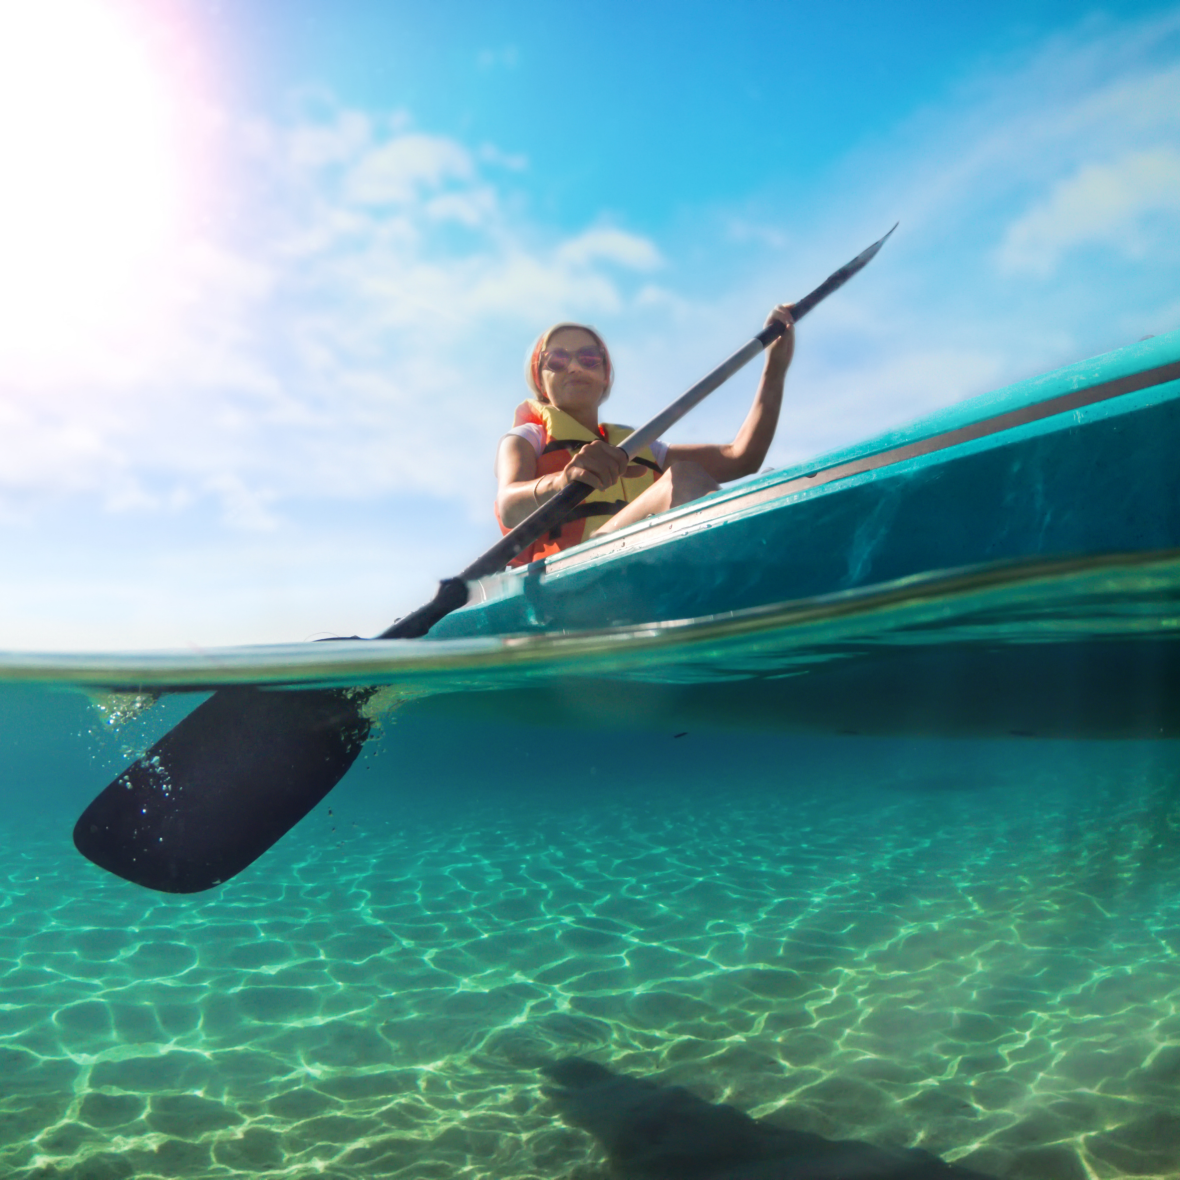 How to kayak: Advice for beginners